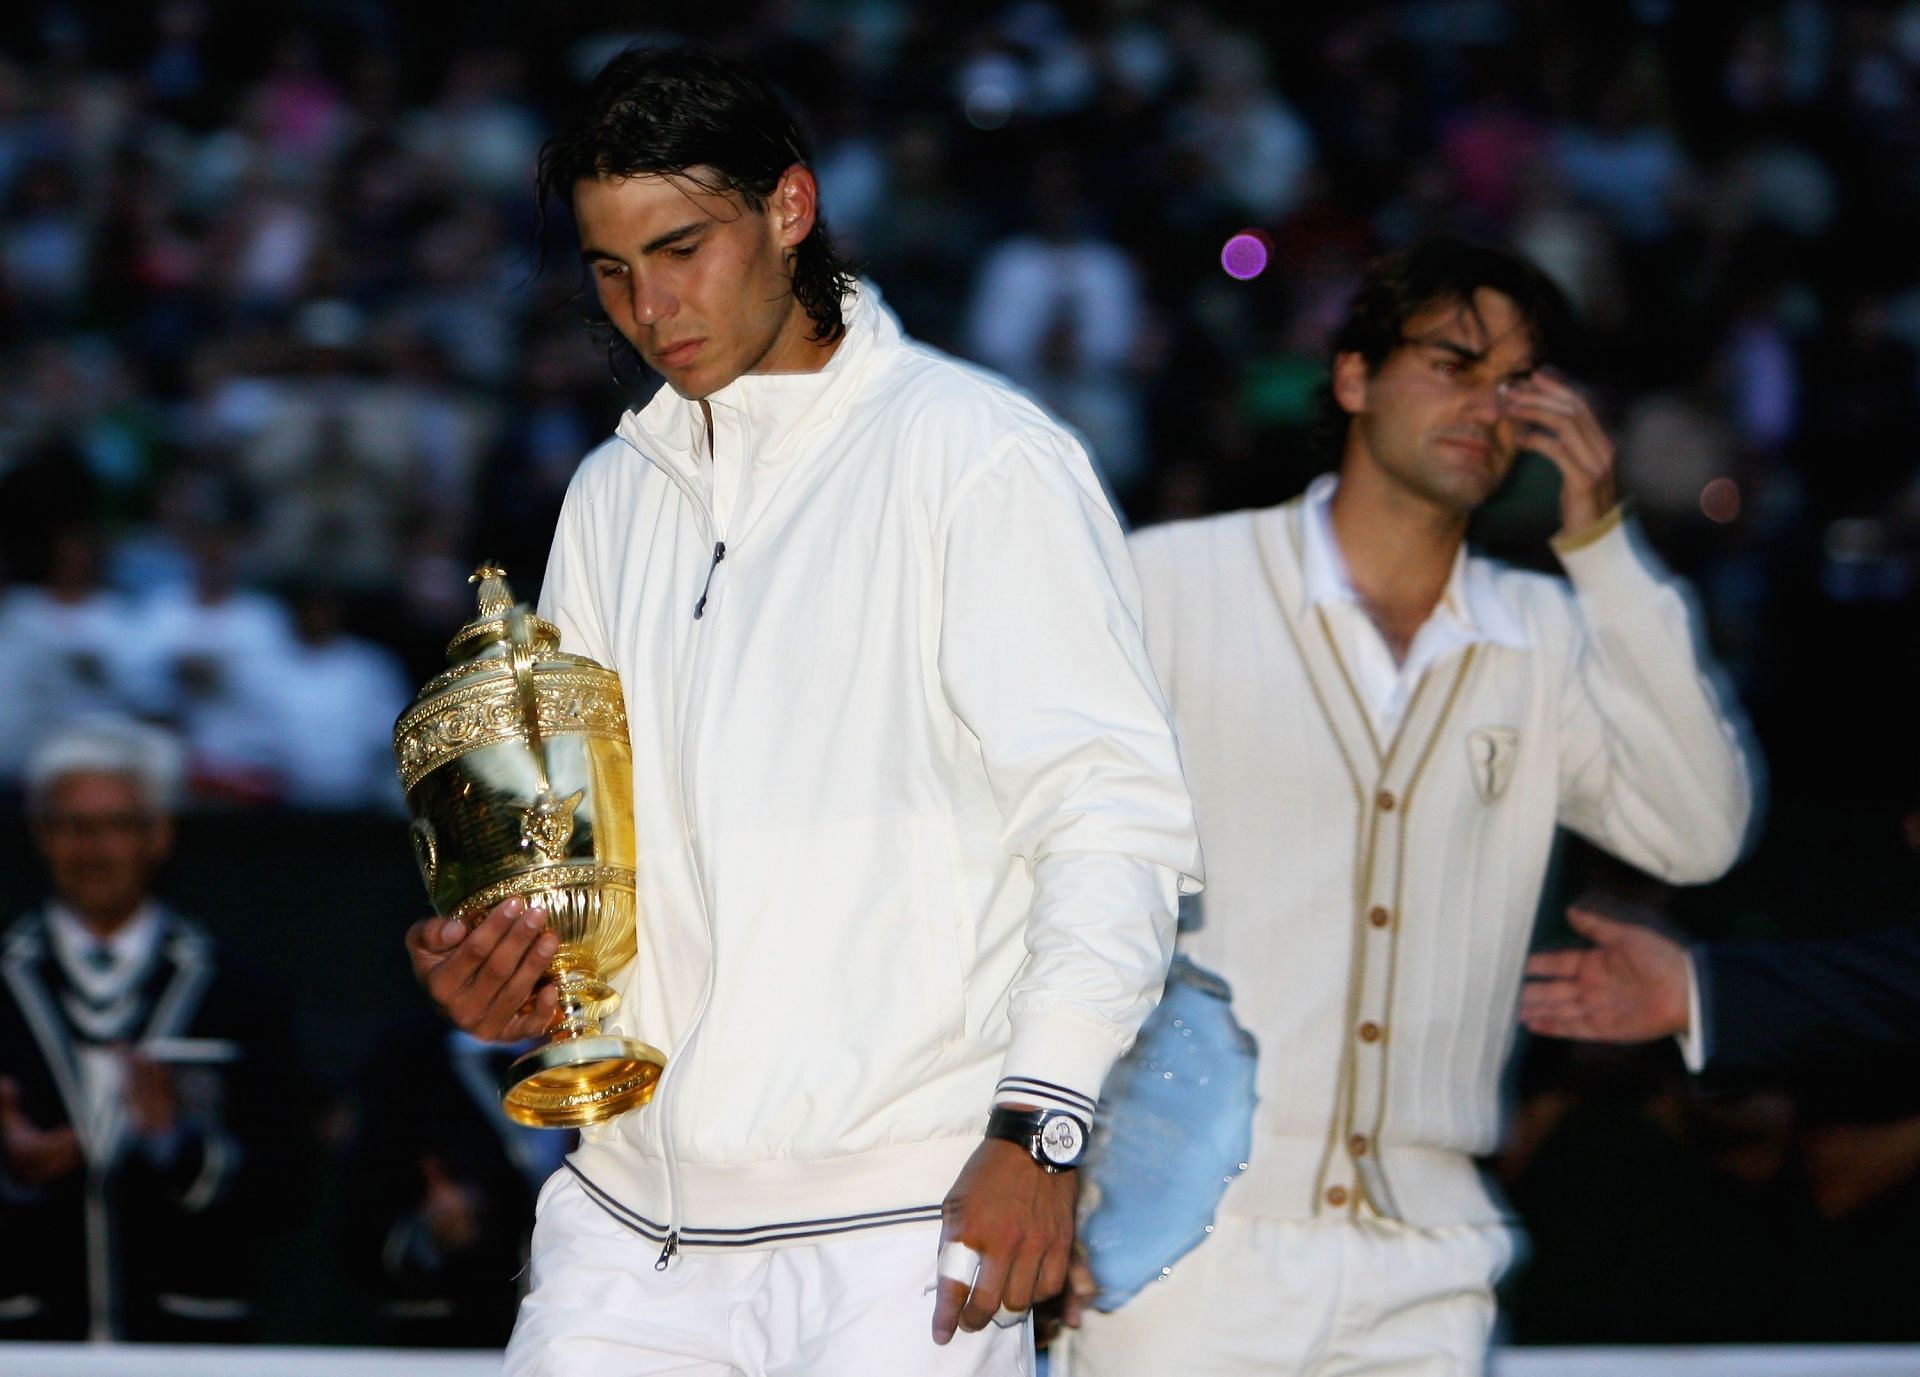 Nadal (L) and Federer at the 2008 Wimbledon Championships